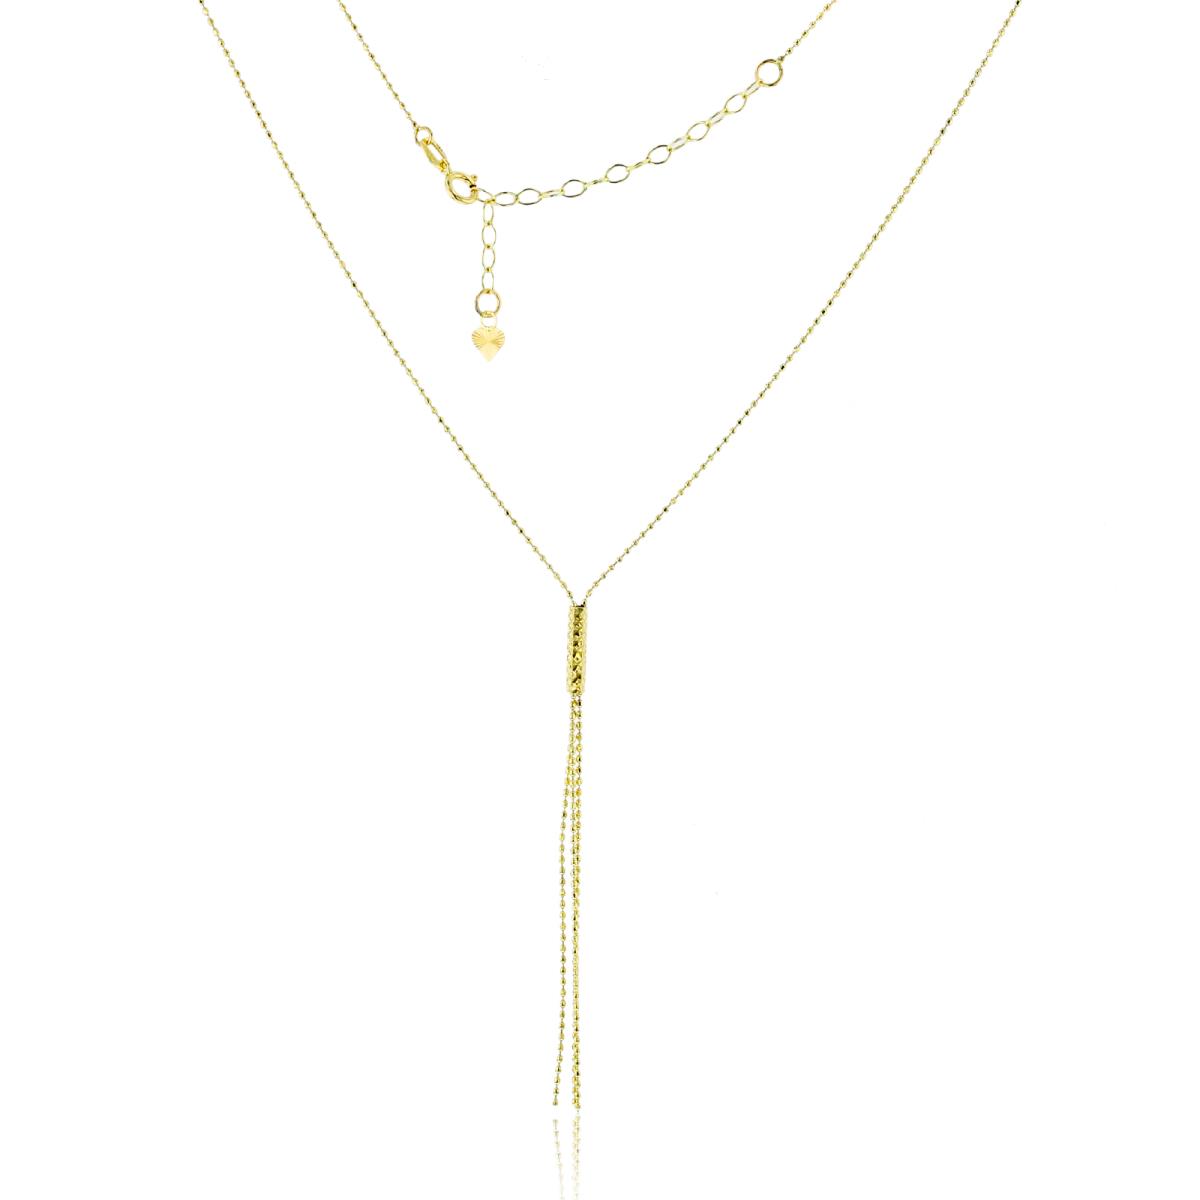 14K Yellow Gold Beaded Chain with DC Tube & Bead Chain Tassel 16"+2" Necklace